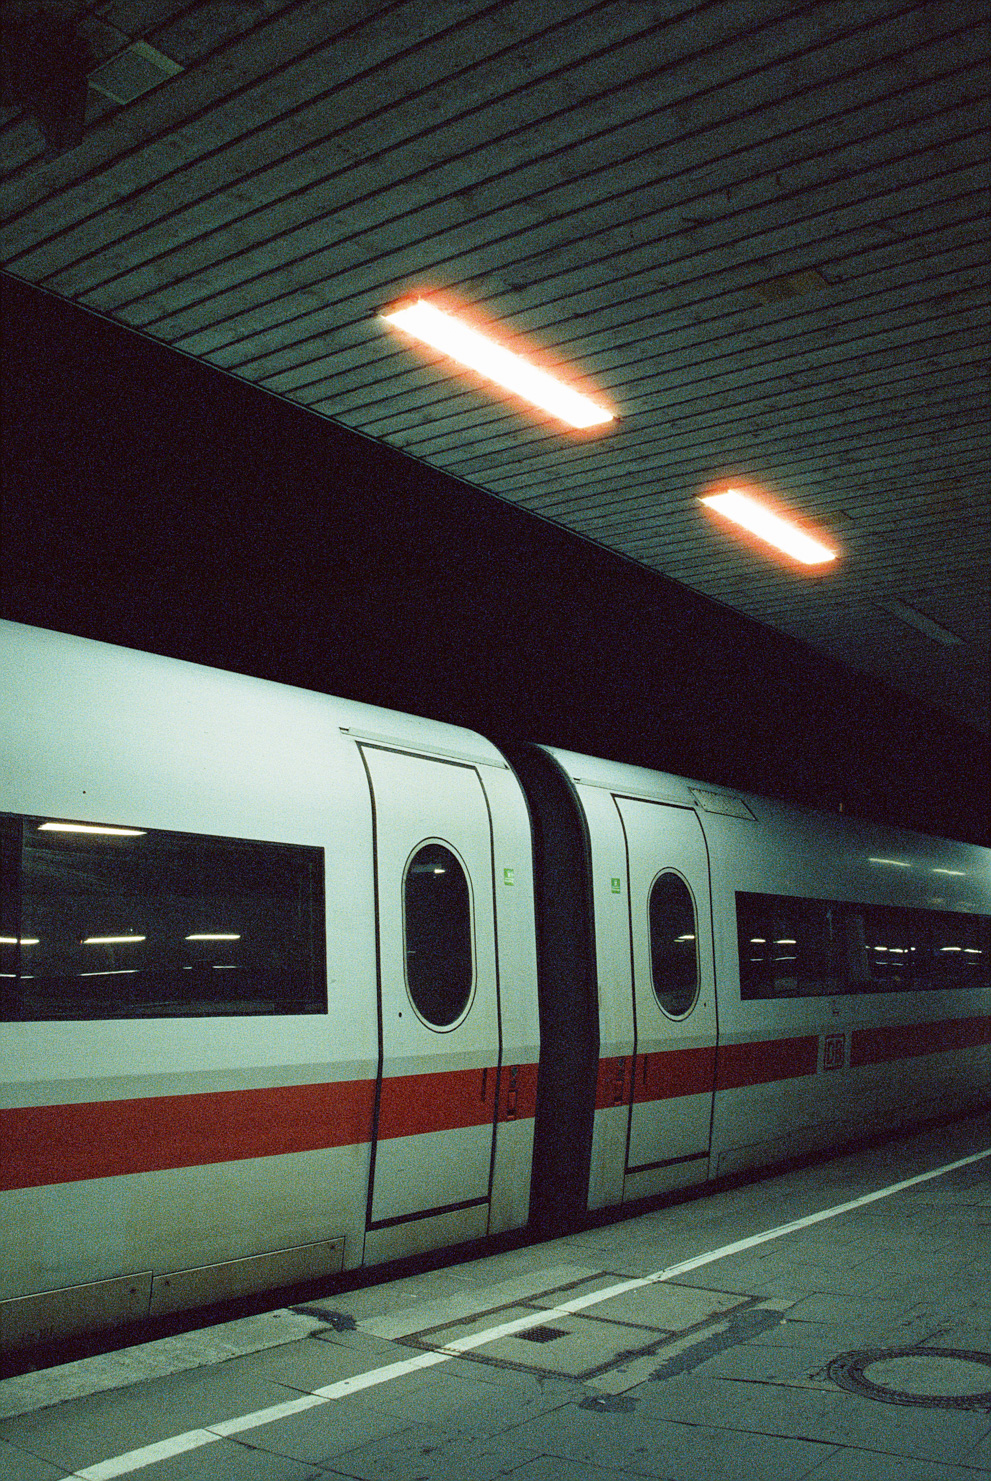 A Intercity Express train parked at the station at night.  Shot on Cinestille 800T.